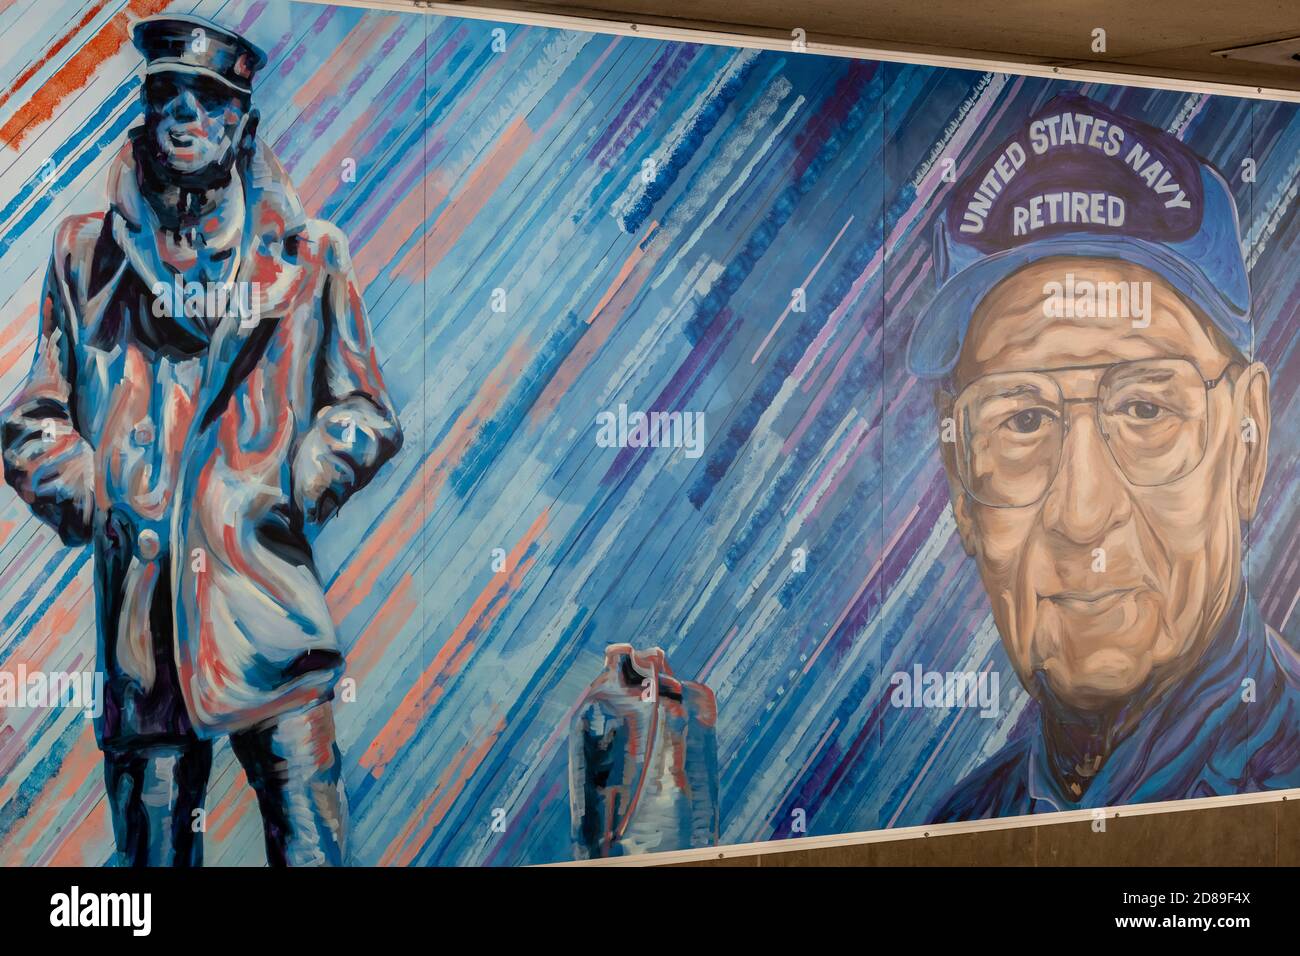 Addison Karl's colourful mural “In Service” at the Vermont Avenue entrance to McPherson Square Metrorail Station honours US Veterans through the ages Stock Photo